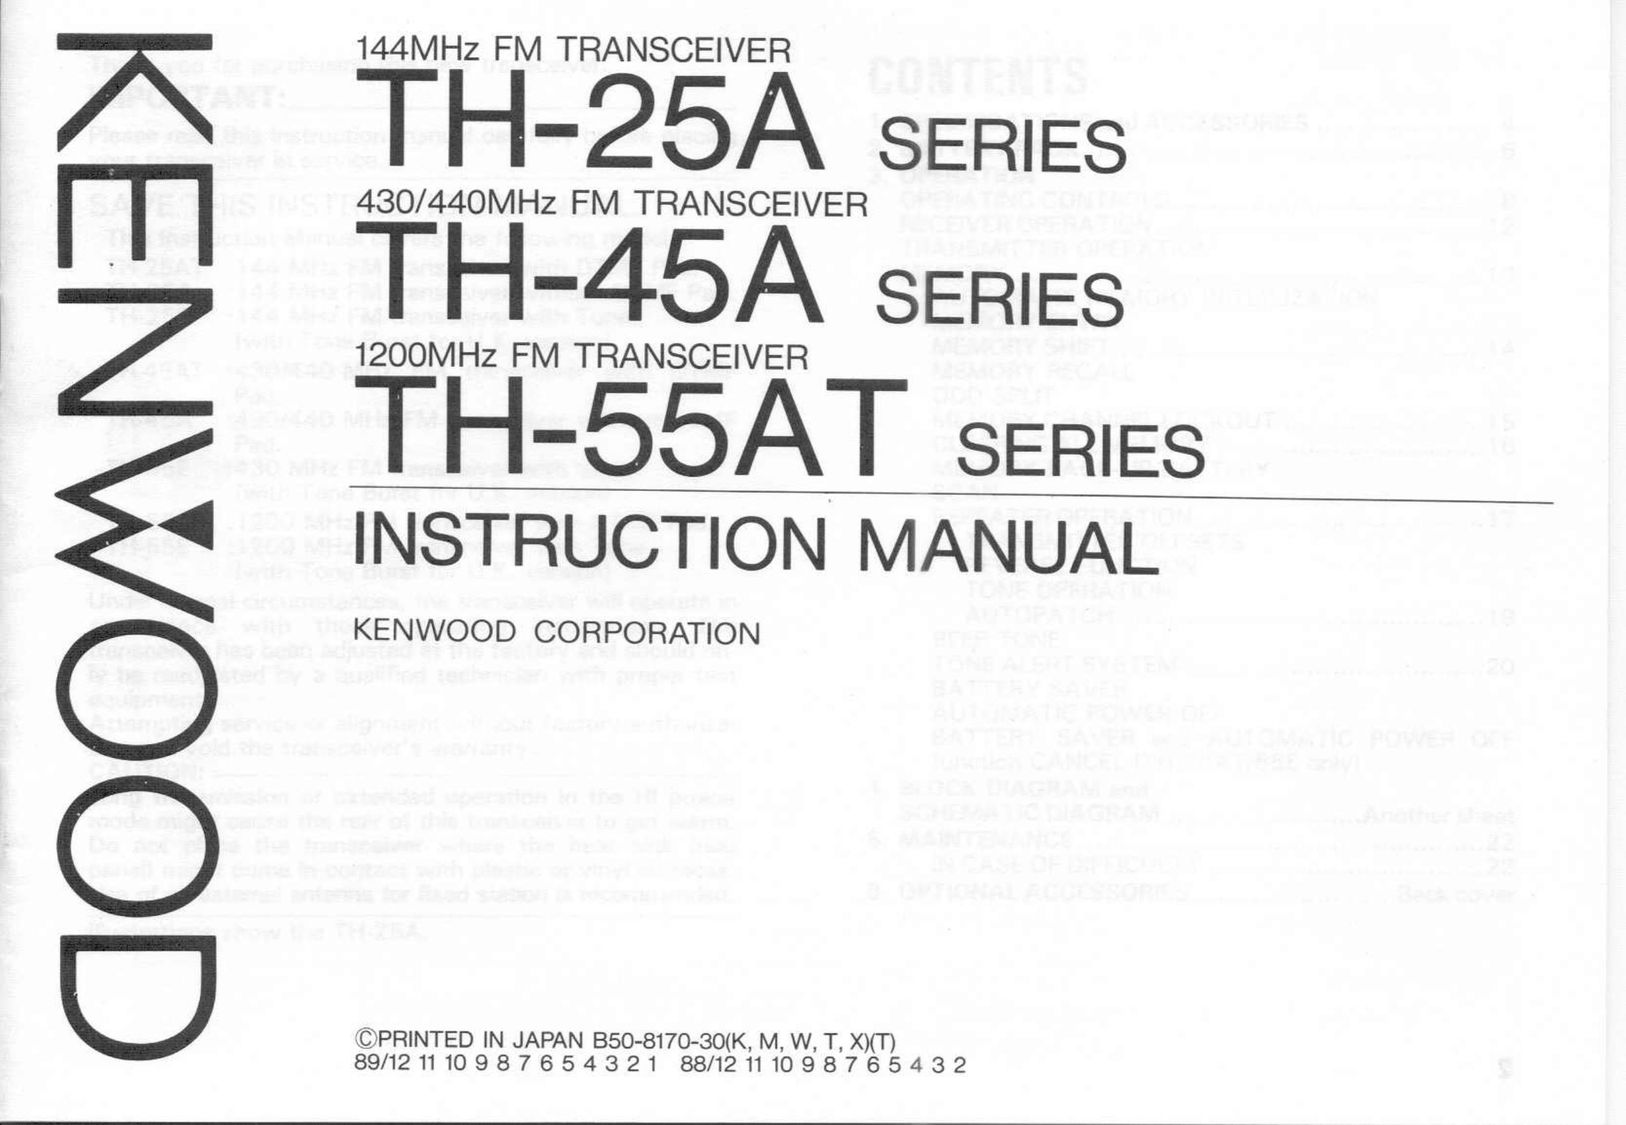 Kenwood TH-45A Home Security System User Manual